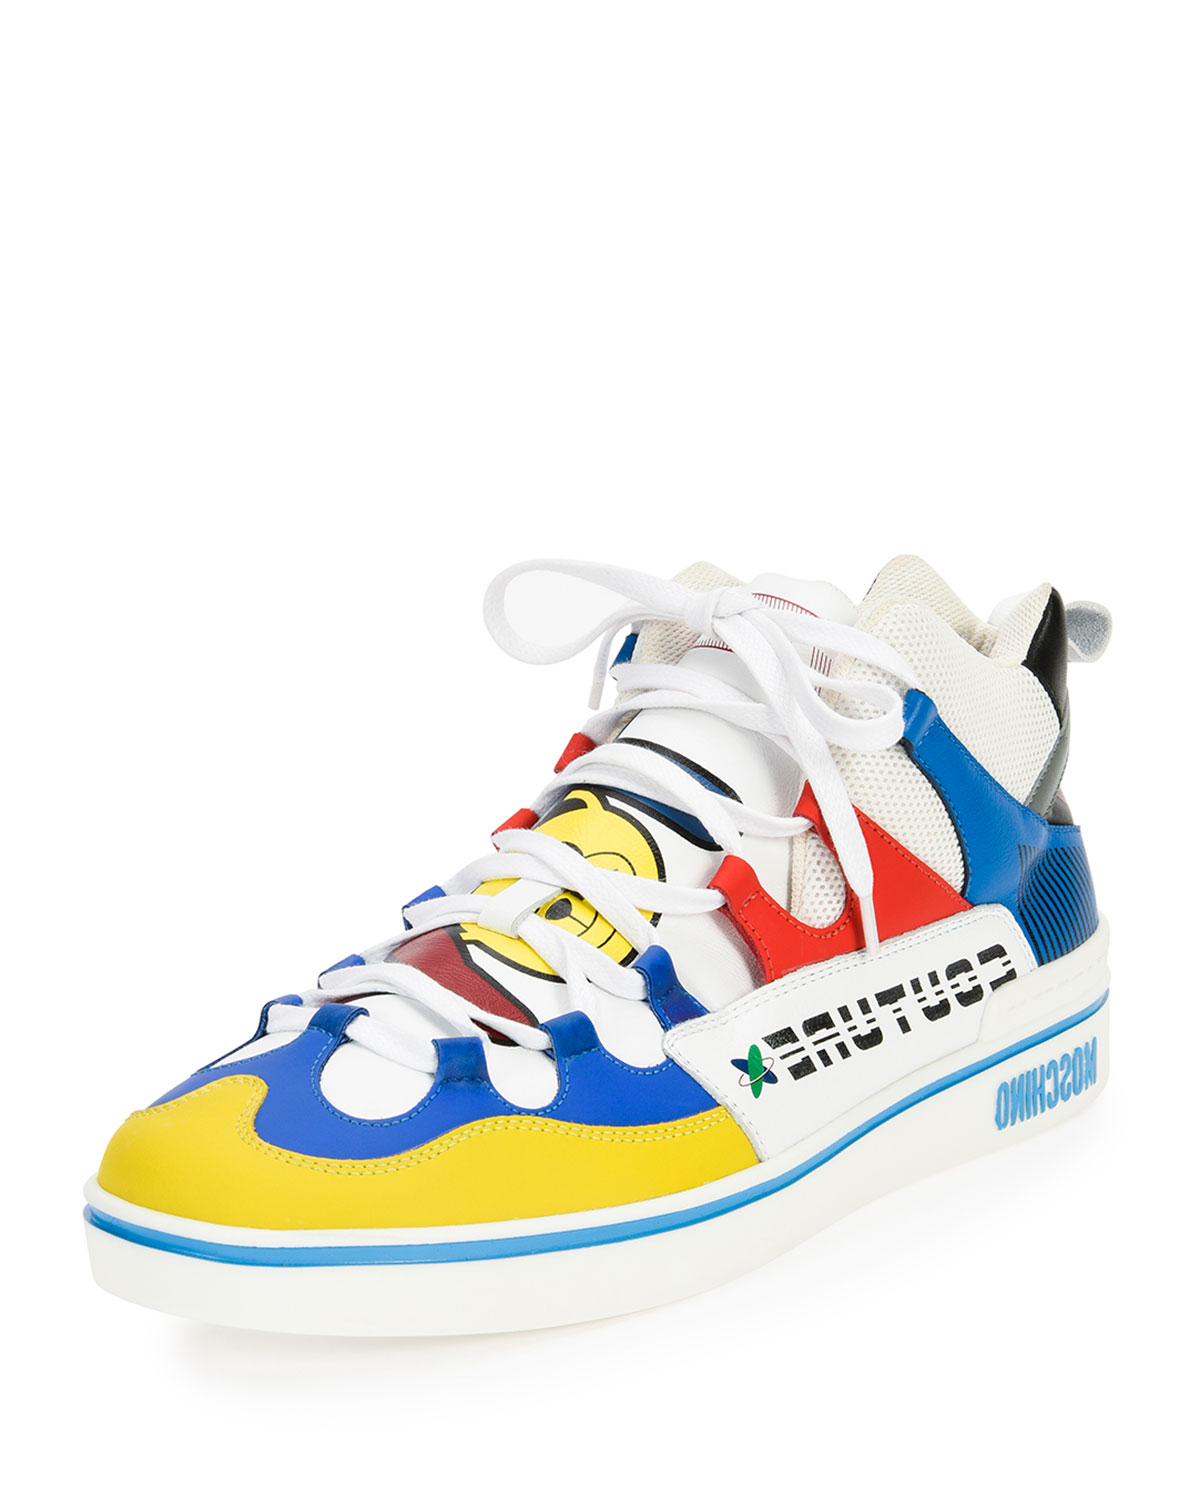 Moschino Toy Multicolored Mid-top 